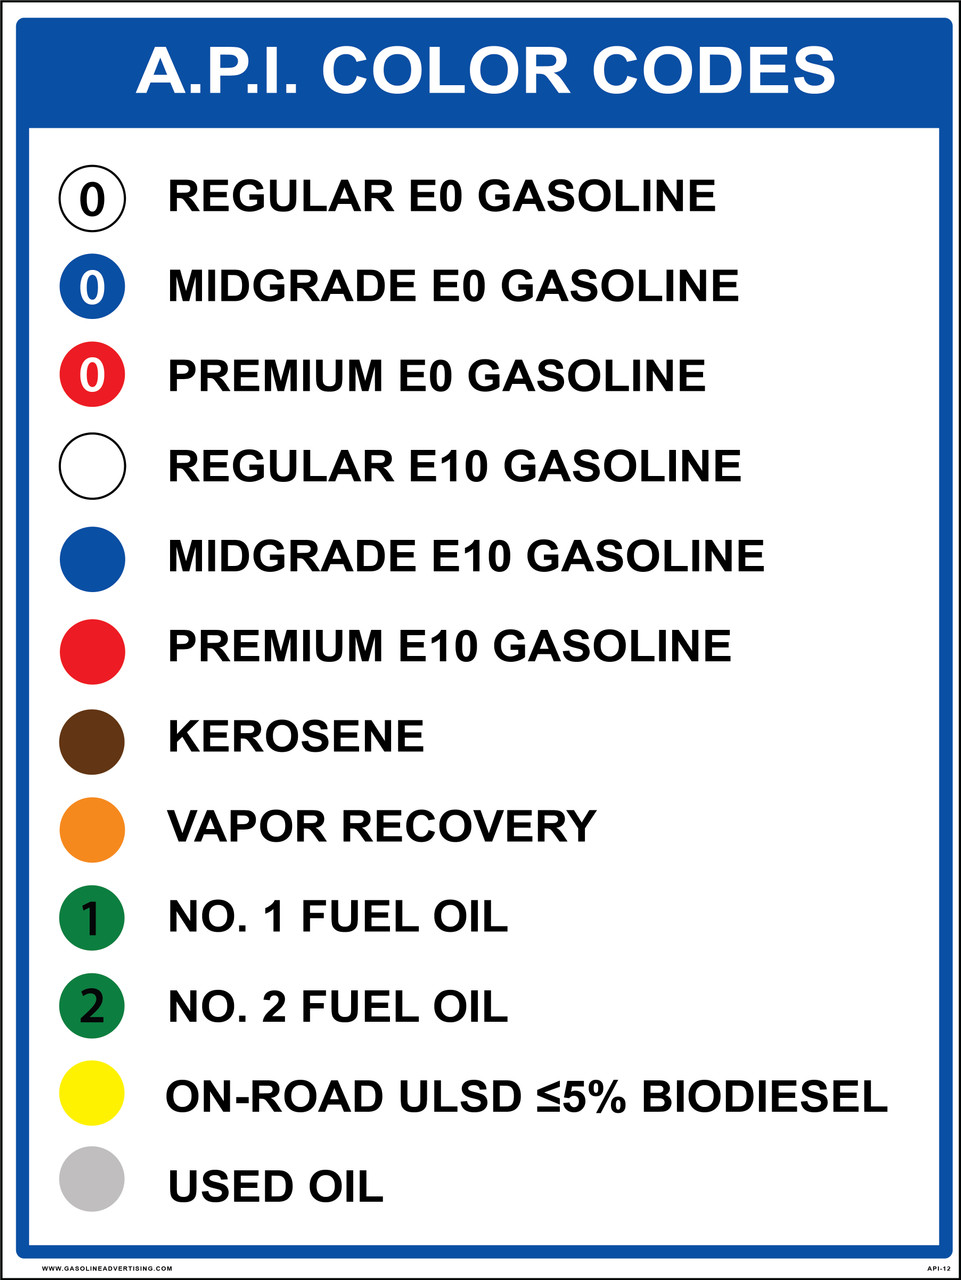 api-12-12-x-16-metal-a-p-i-color-codes-gasoline-advertising-products